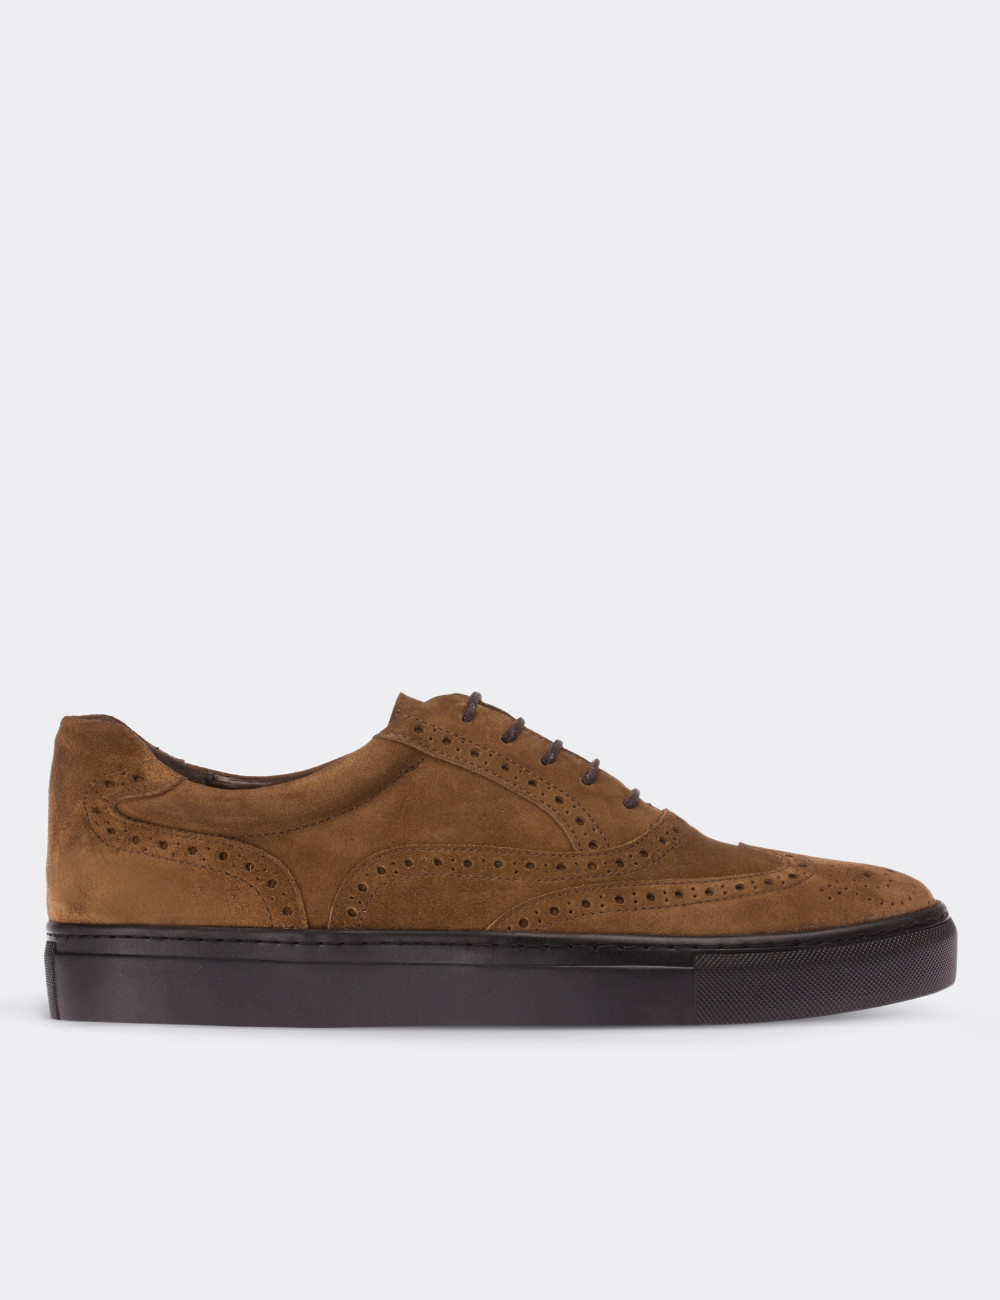 Tan Suede Leather Sneakers - 01637MTBAC04